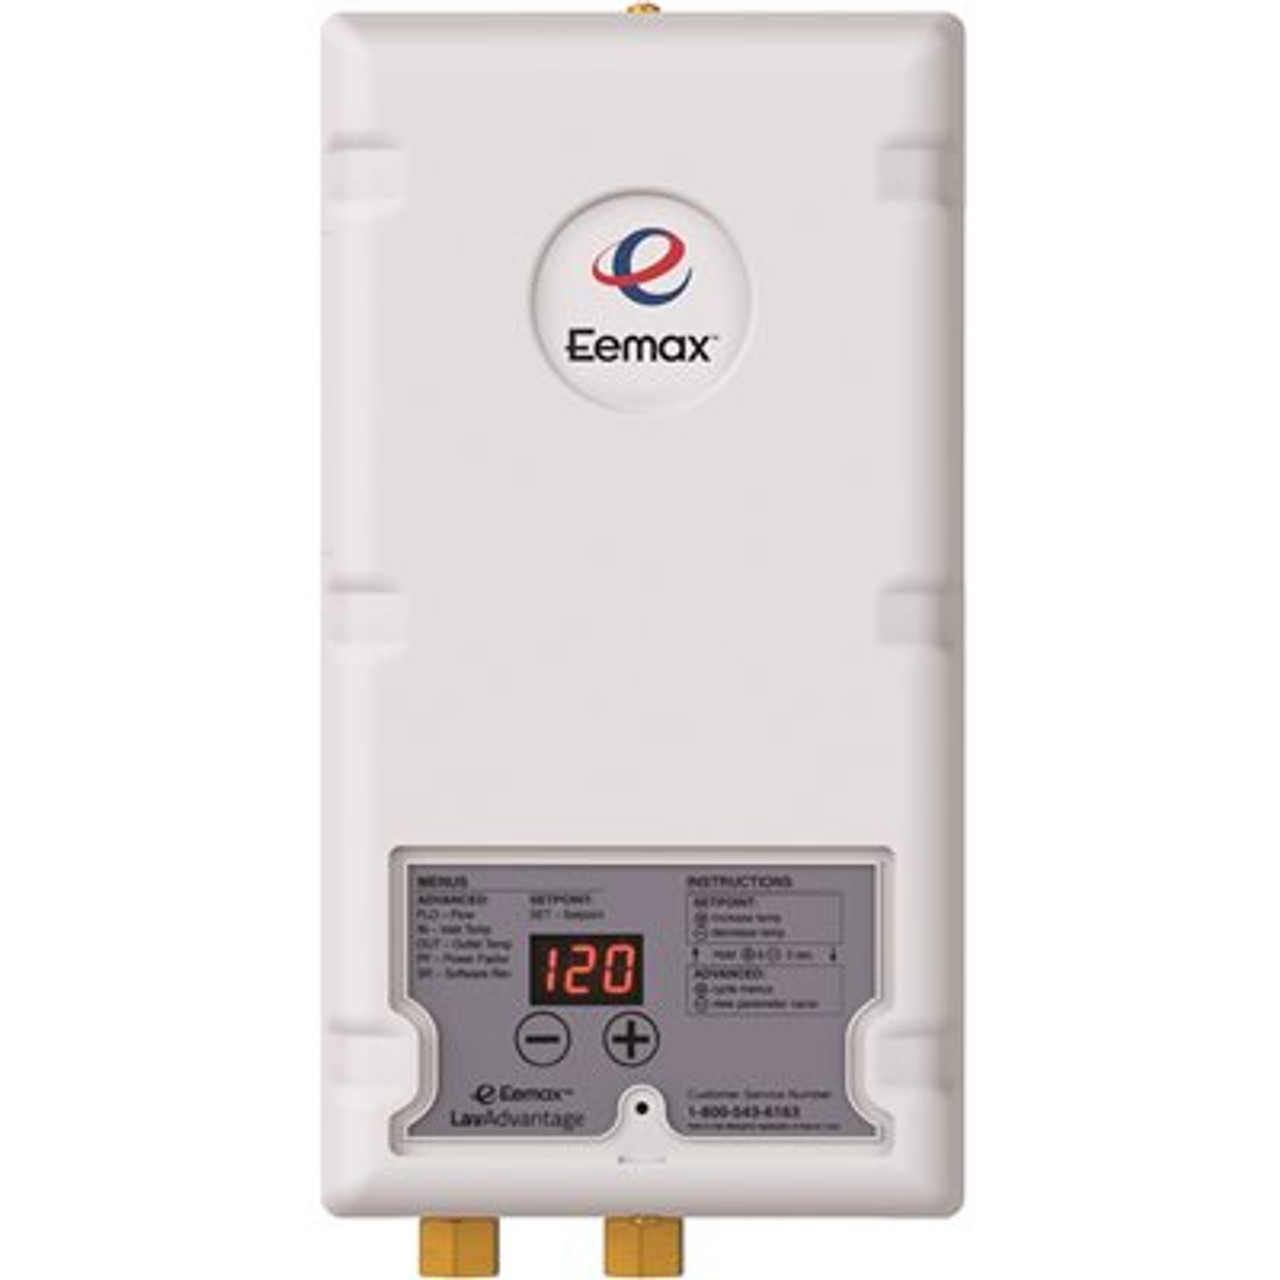 Eemax LavAdvantage 9.5 kW, 240 Volt Commercial Electric Tankless Water Heater, Thermostatic